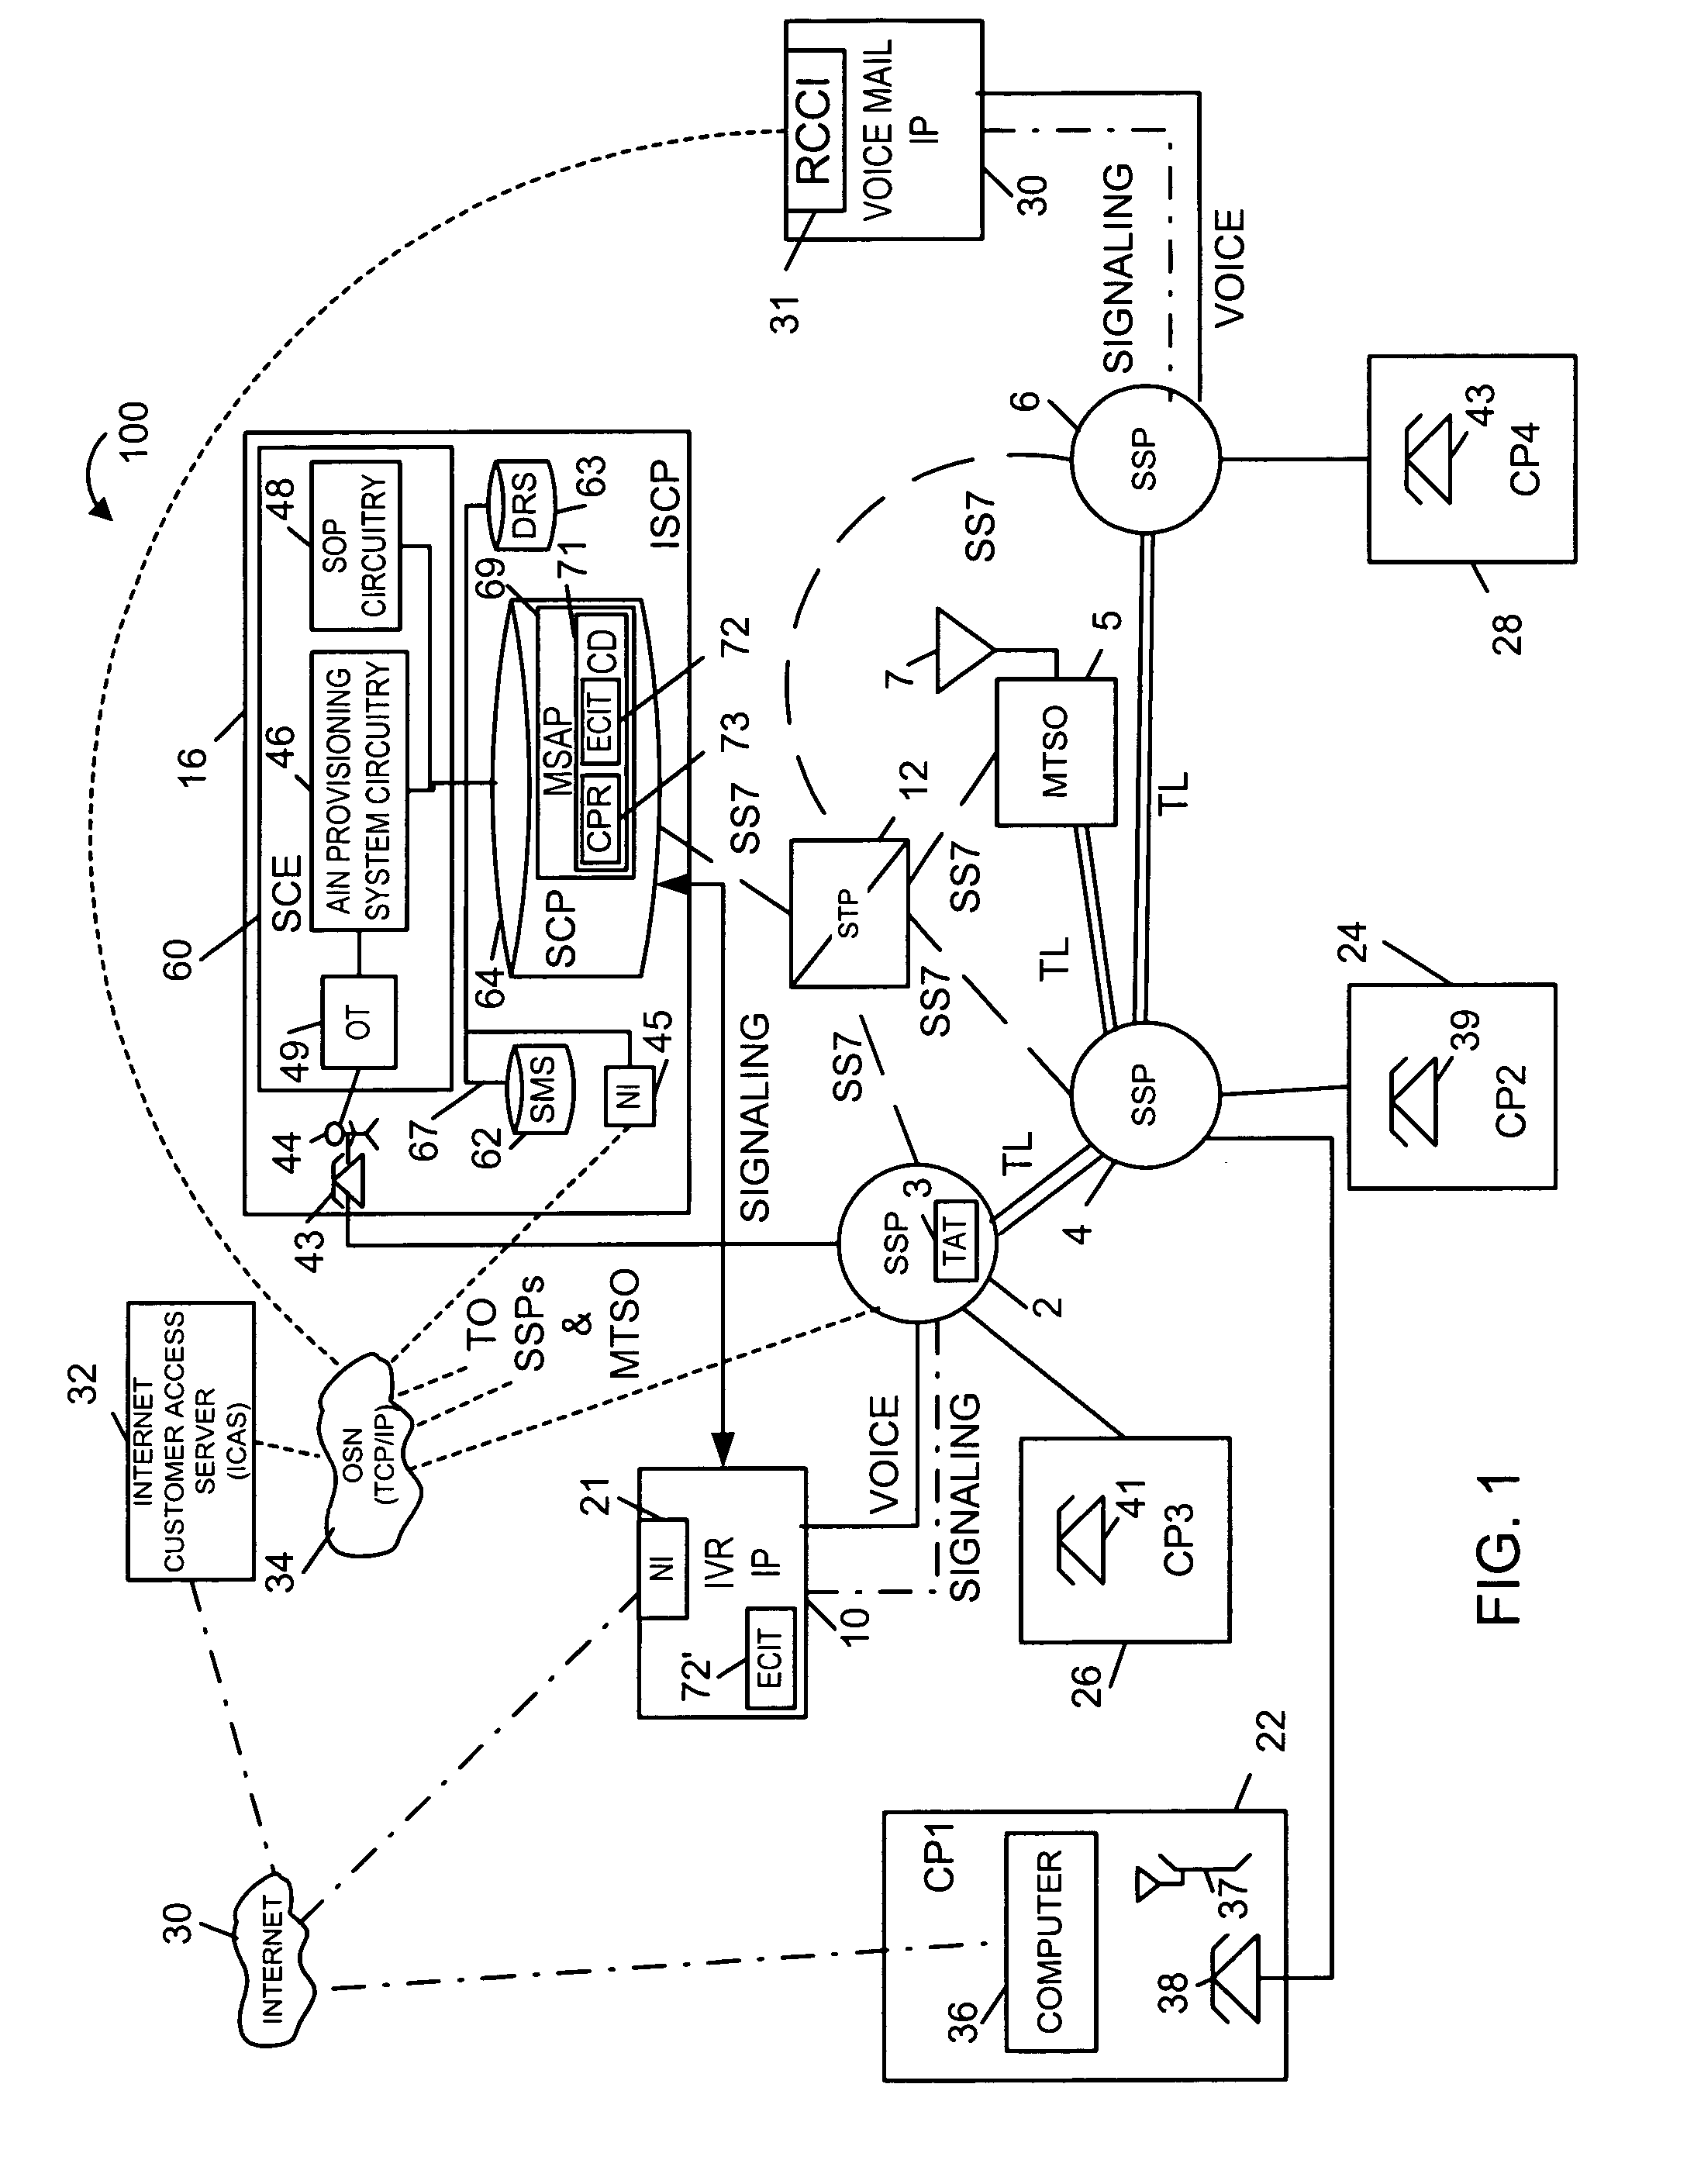 Methods and apparatus for connecting family members